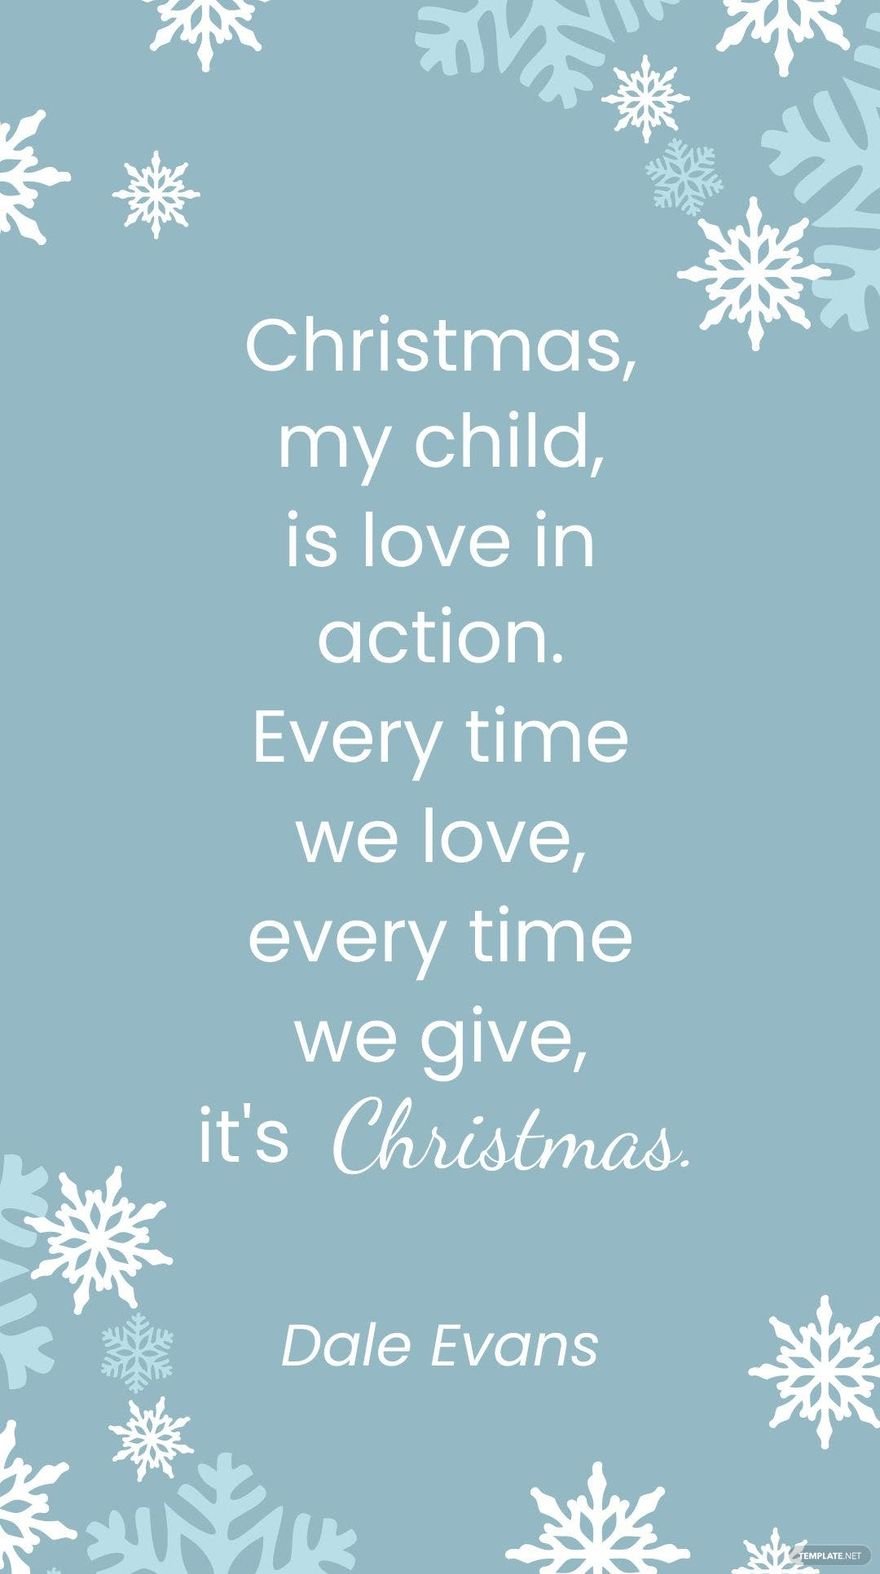 Dale Evans - Christmas, my child, is love in action. Every time we love, every time we give, it's Christmas.